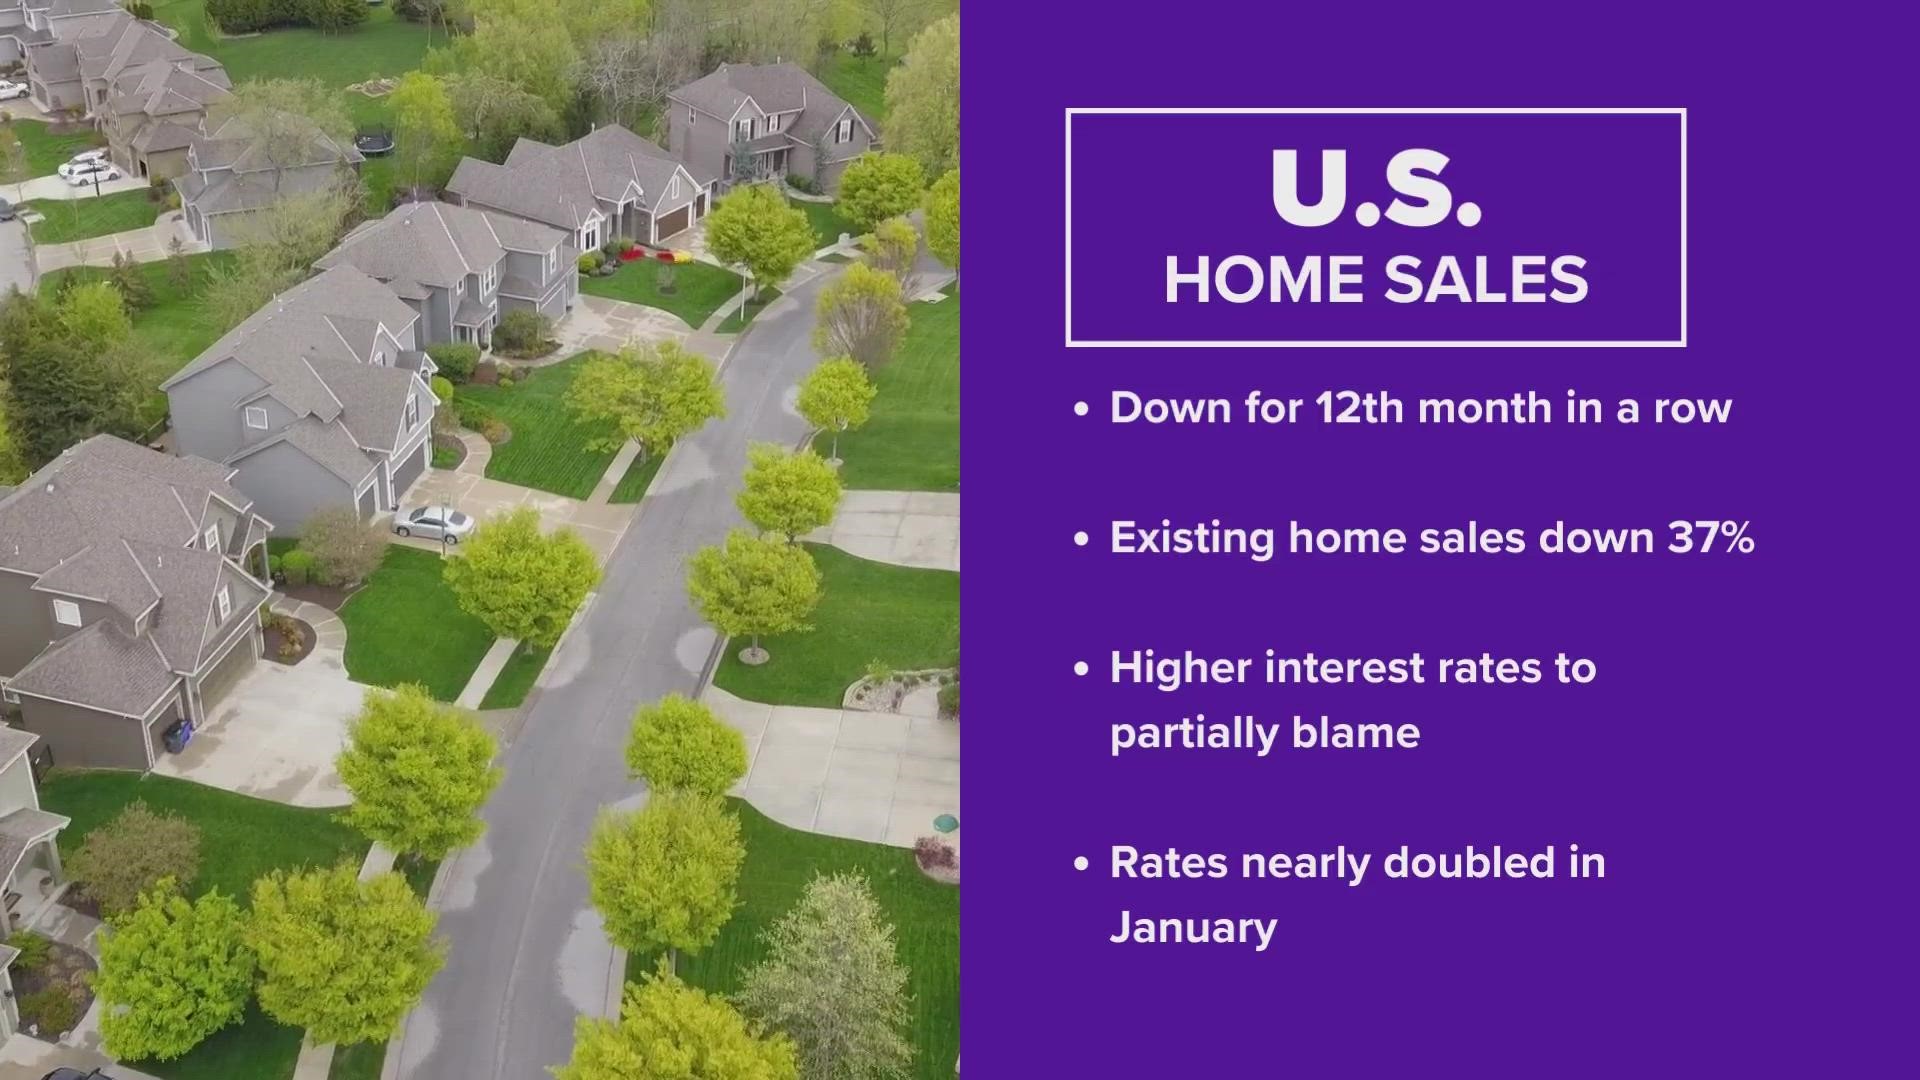 Existing home sales were also down nearly 37% from last January due to higher interest rates.